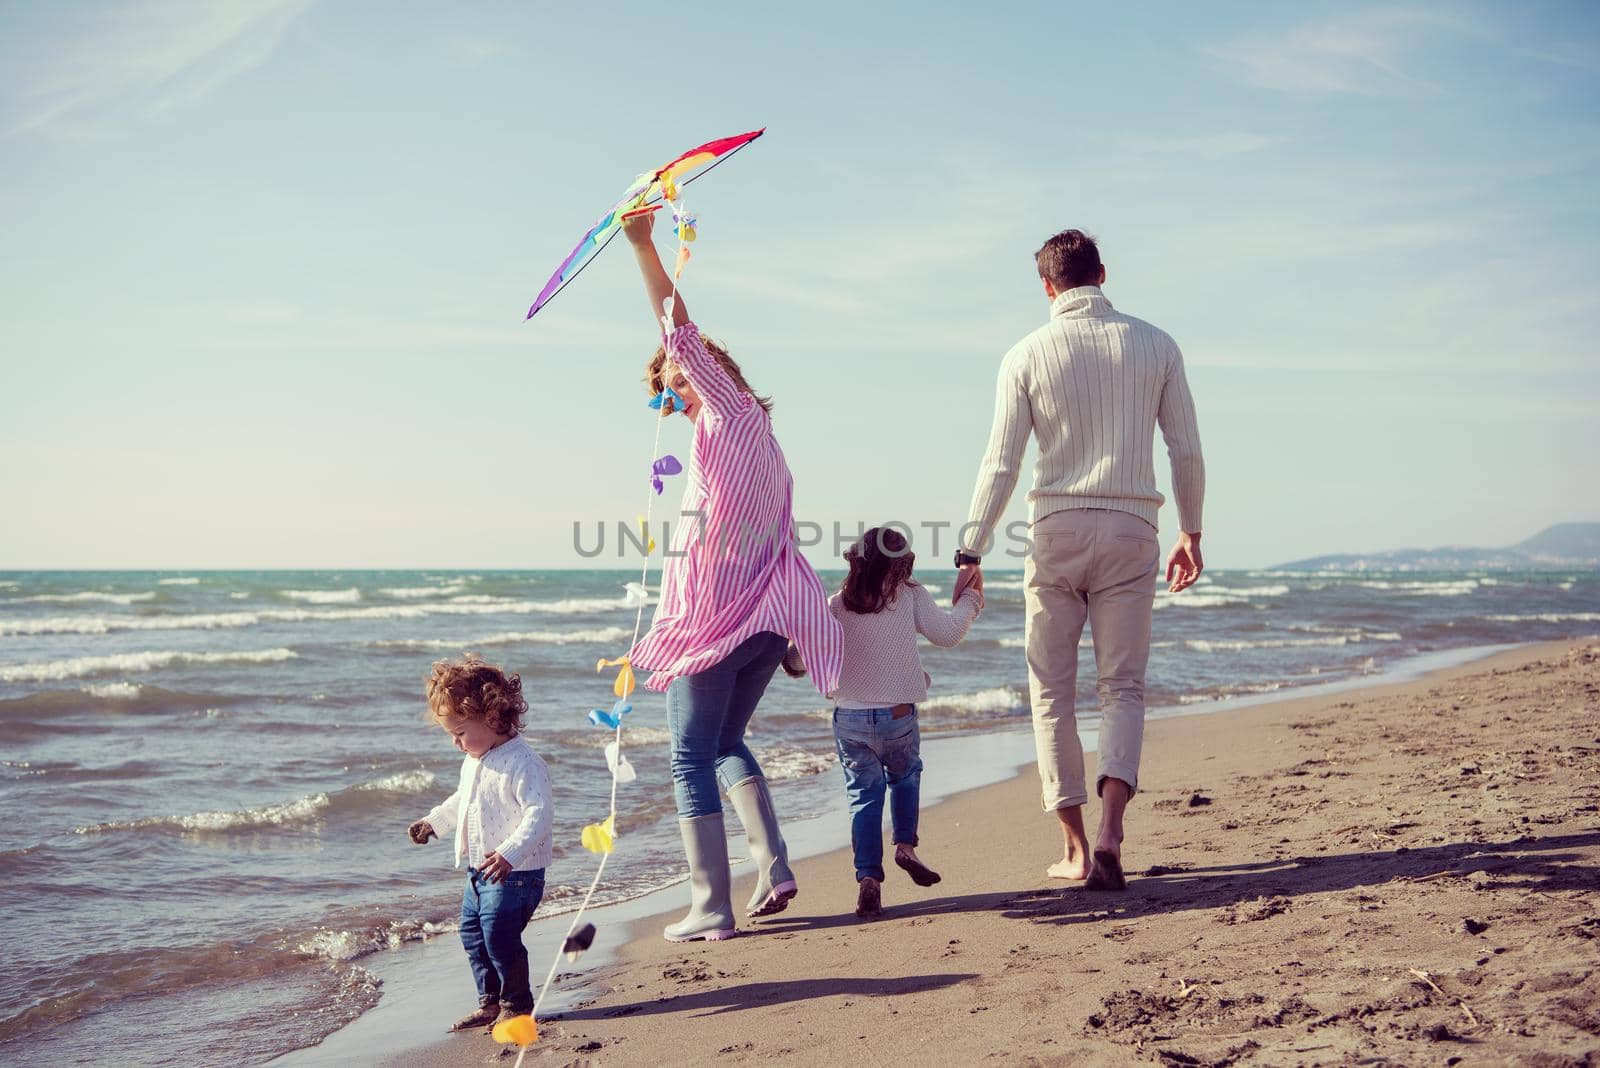 young family with kids resting and having fun with a kite at beach during autumn day filter